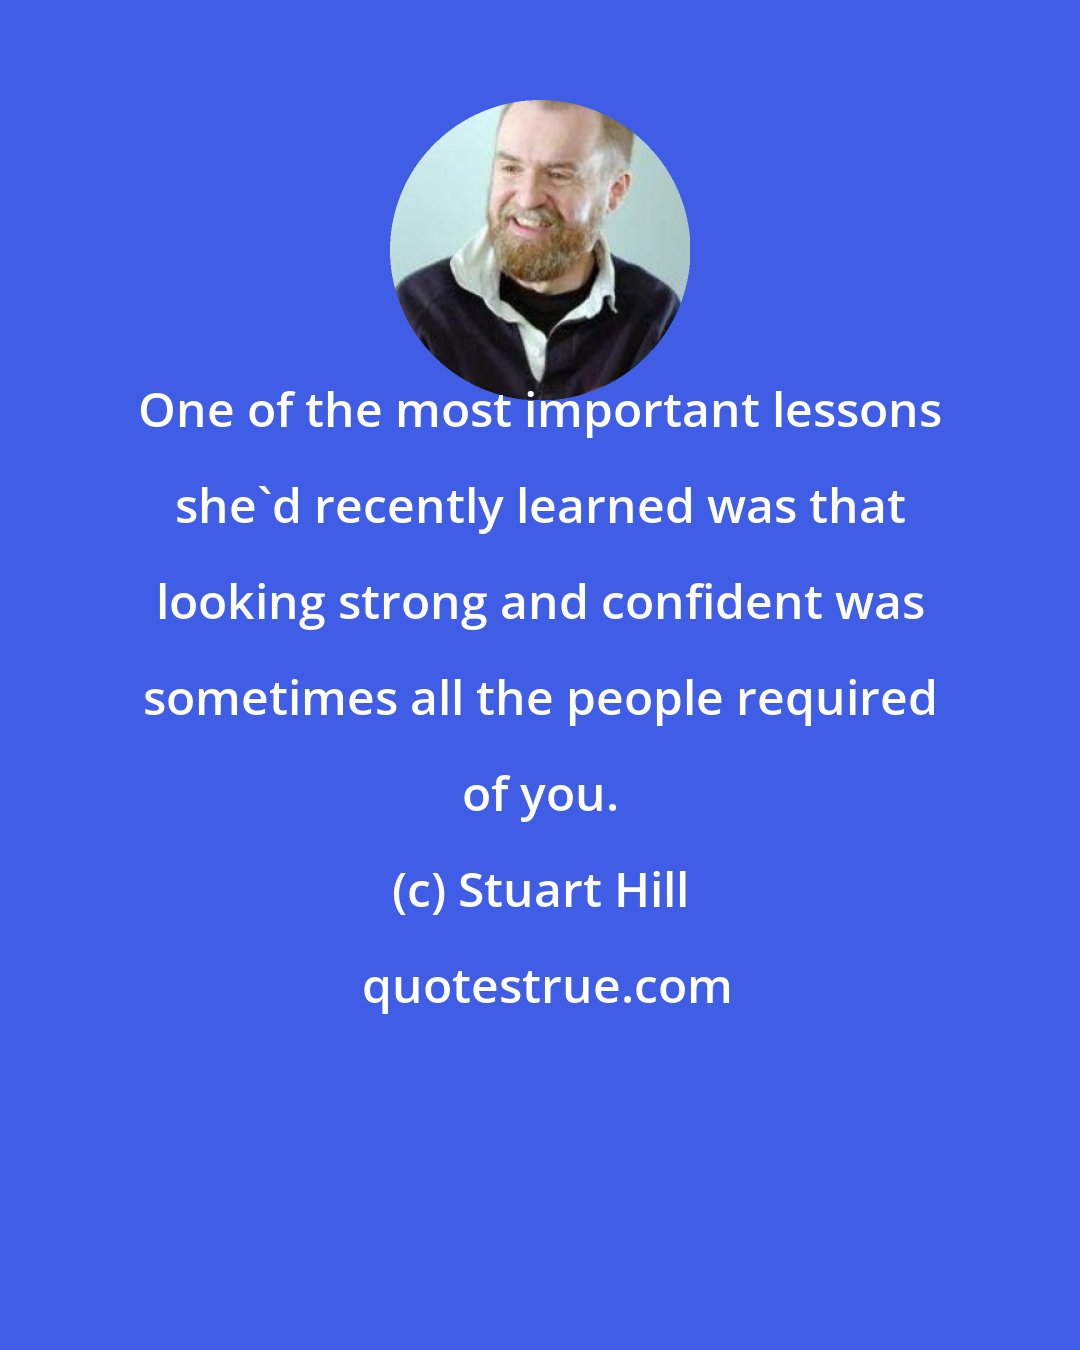 Stuart Hill: One of the most important lessons she'd recently learned was that looking strong and confident was sometimes all the people required of you.